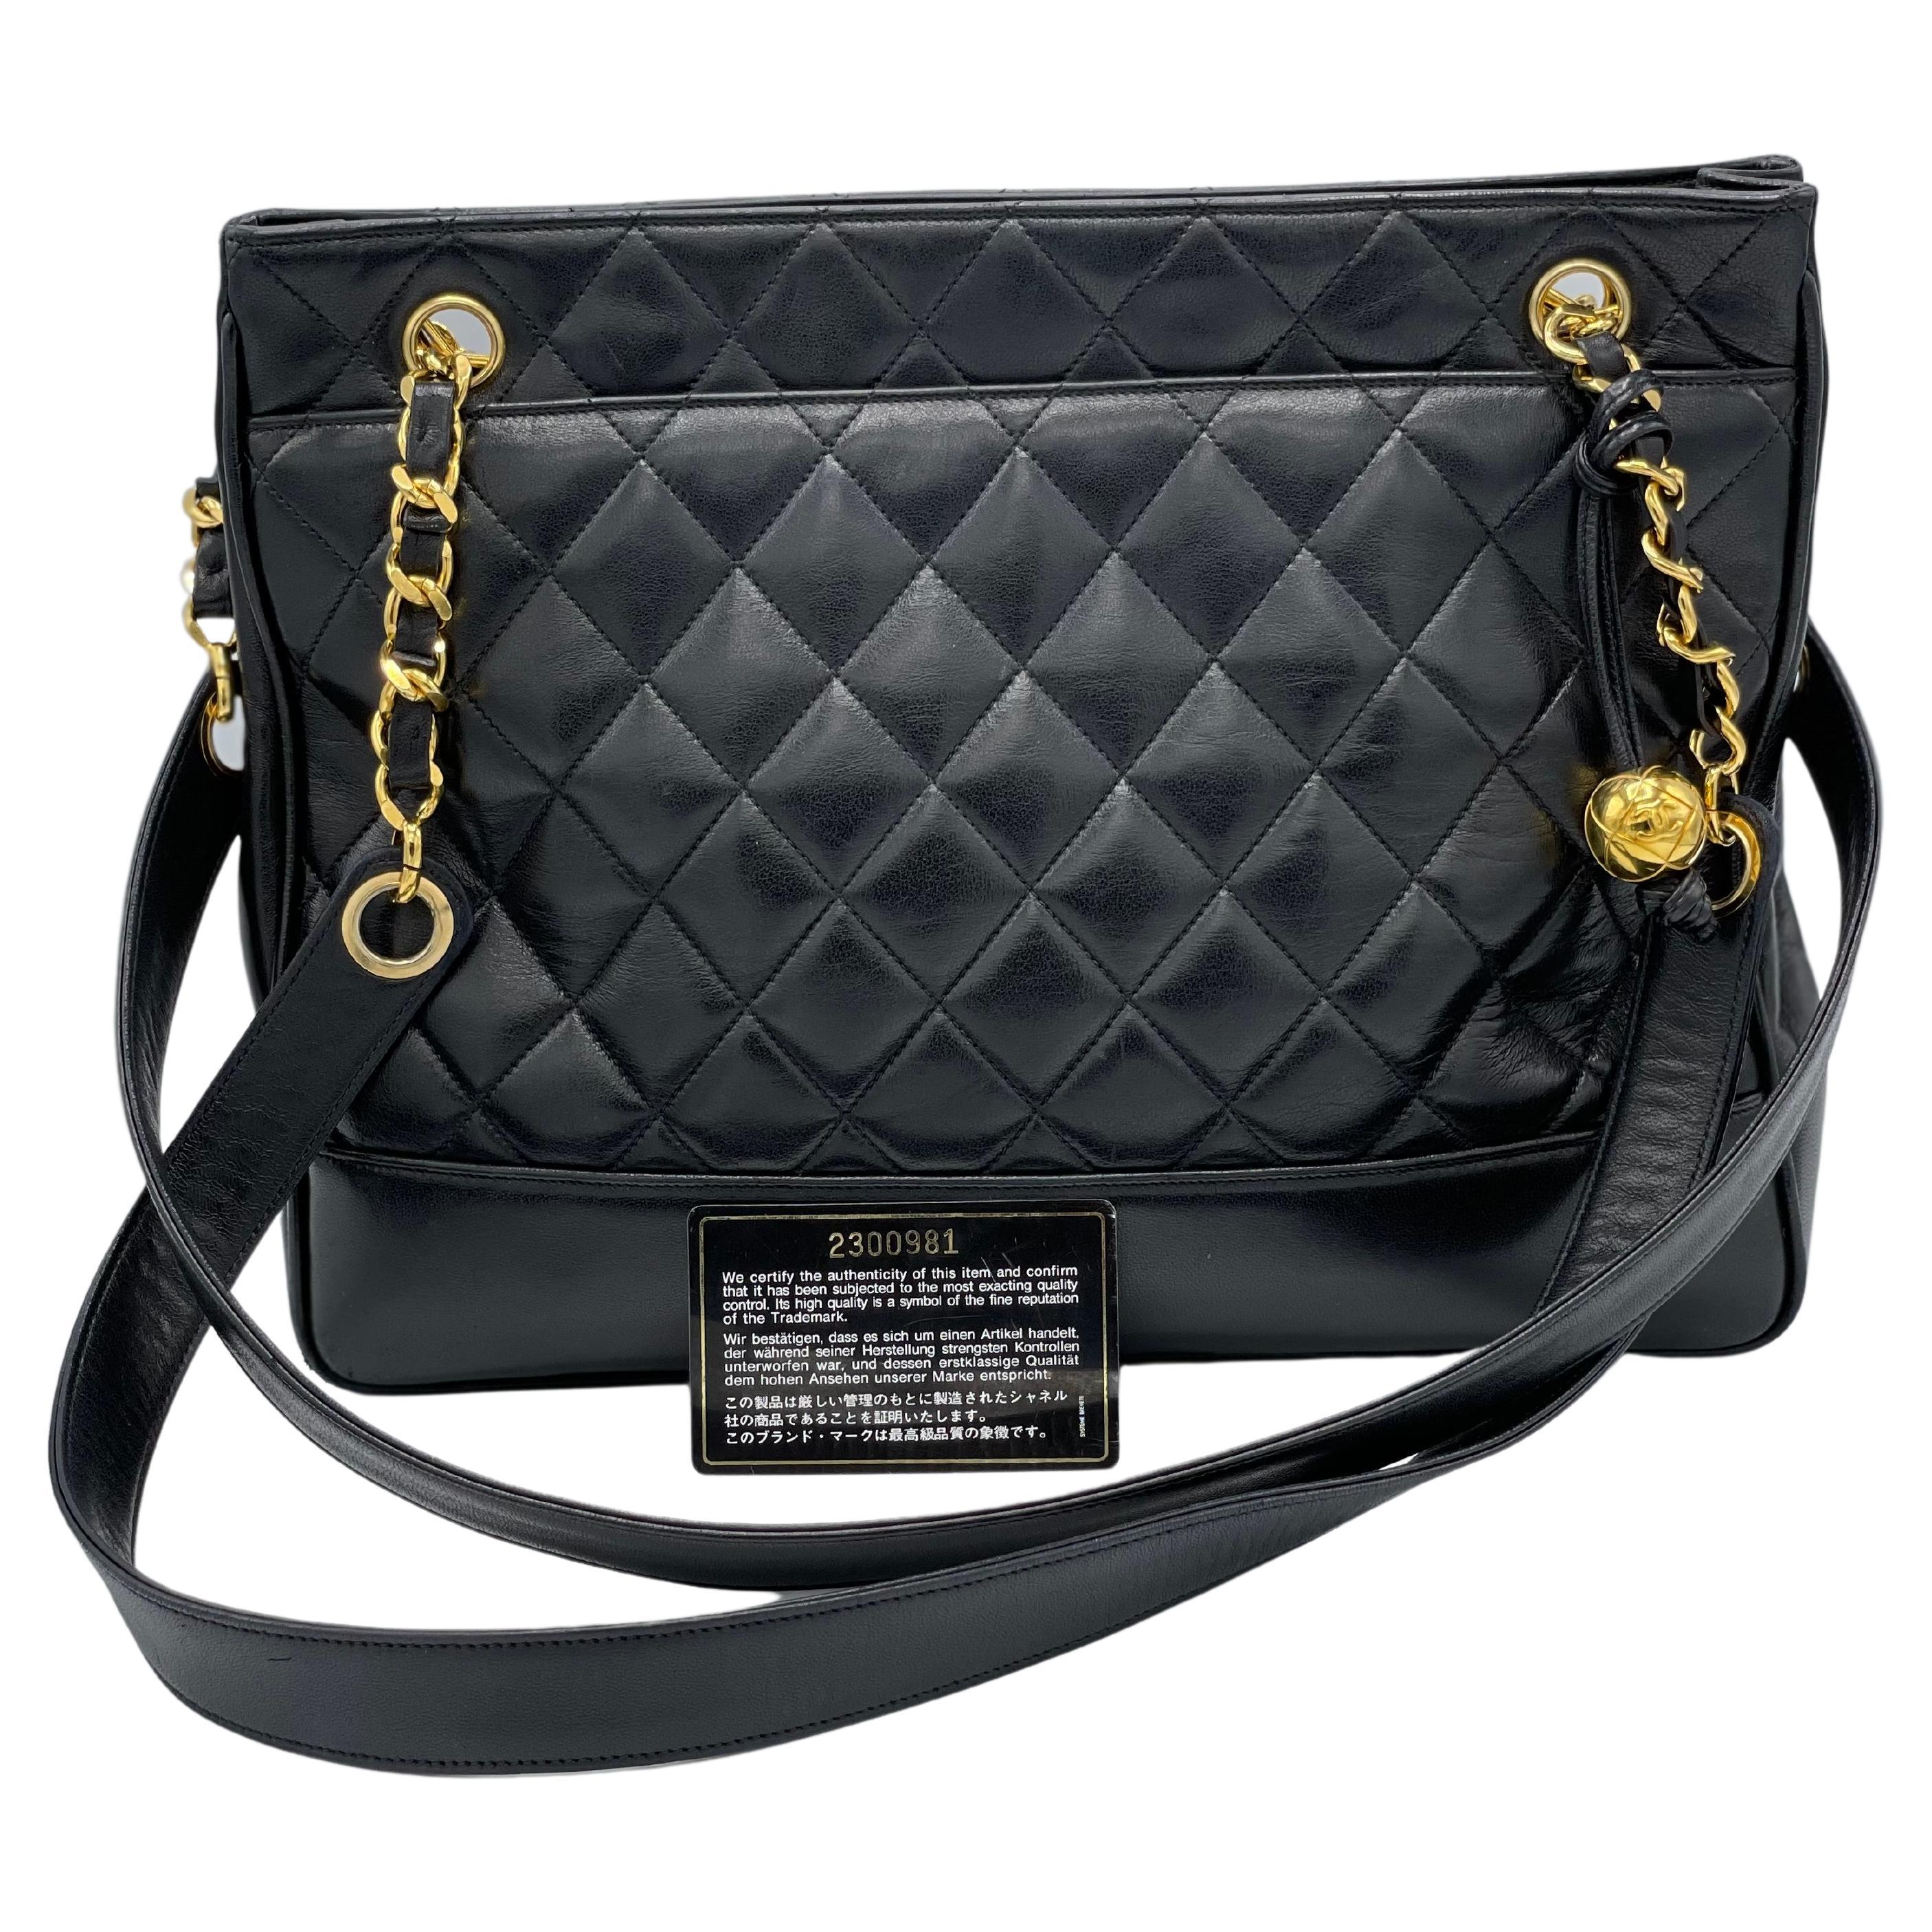 Chanel antique black leather shoulder bag with quilting and gold hardware. The two pockets are both functional and original. It has an inside zip pocket with golden embellishments. Dual leather shoulder straps with gold trim at the base. In